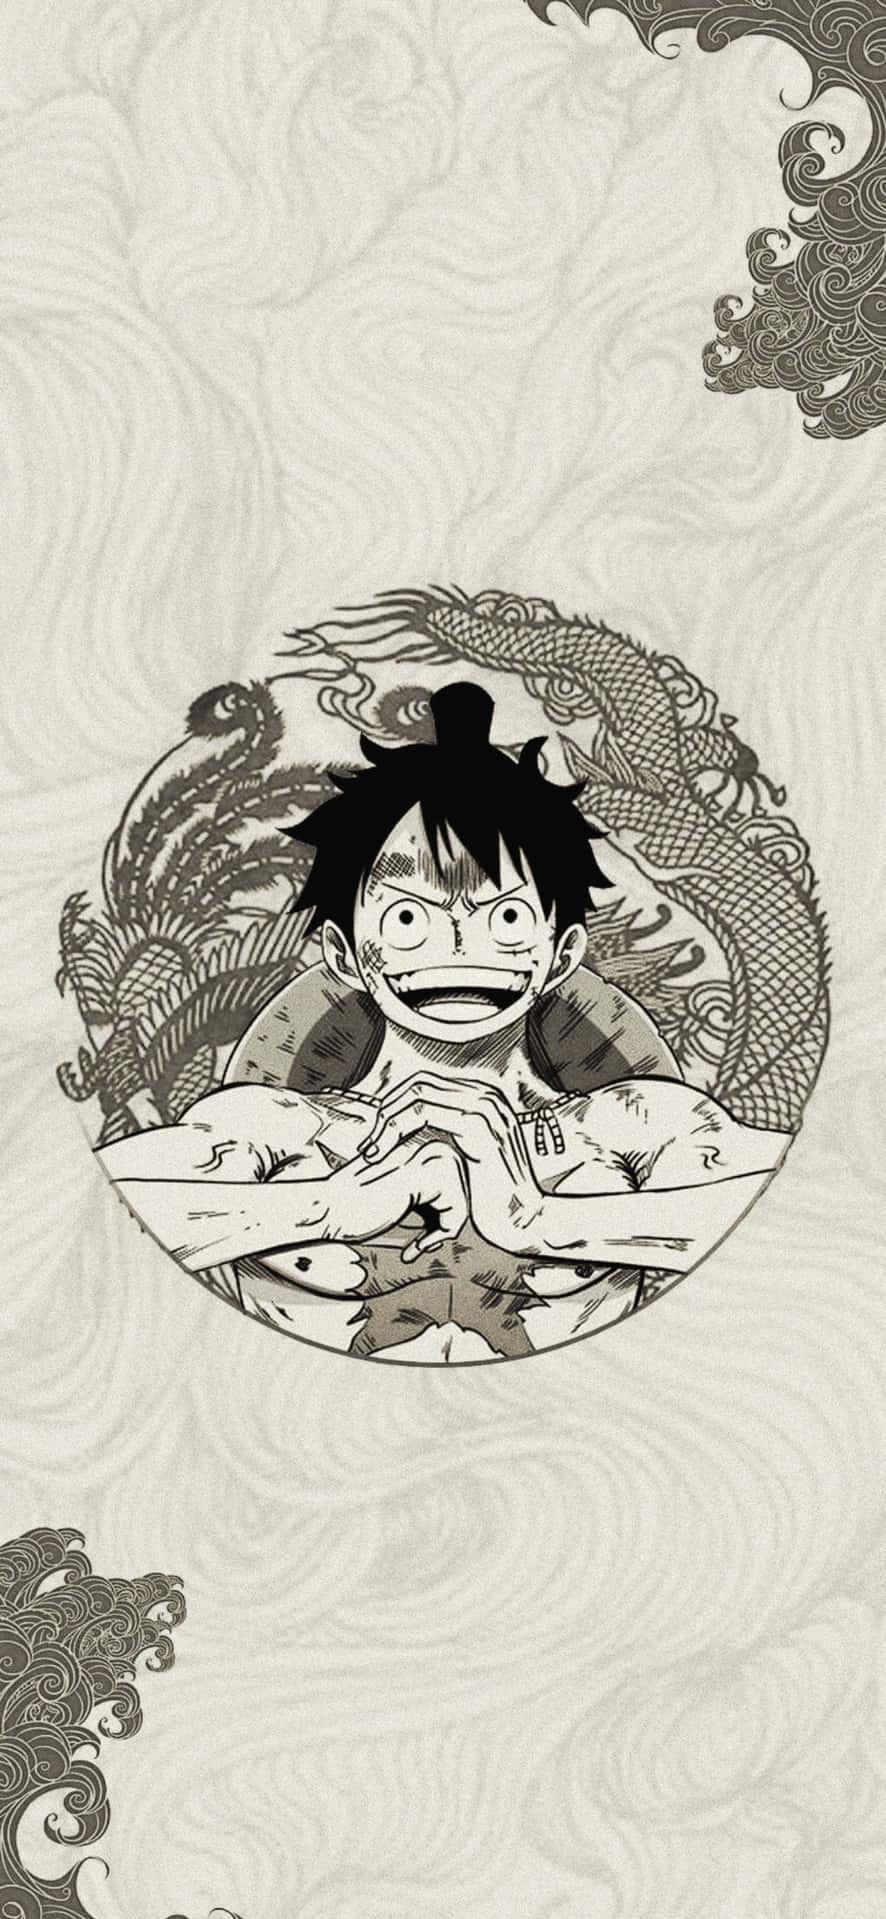 Luffy Looks To Take The Grand Line With Power Of